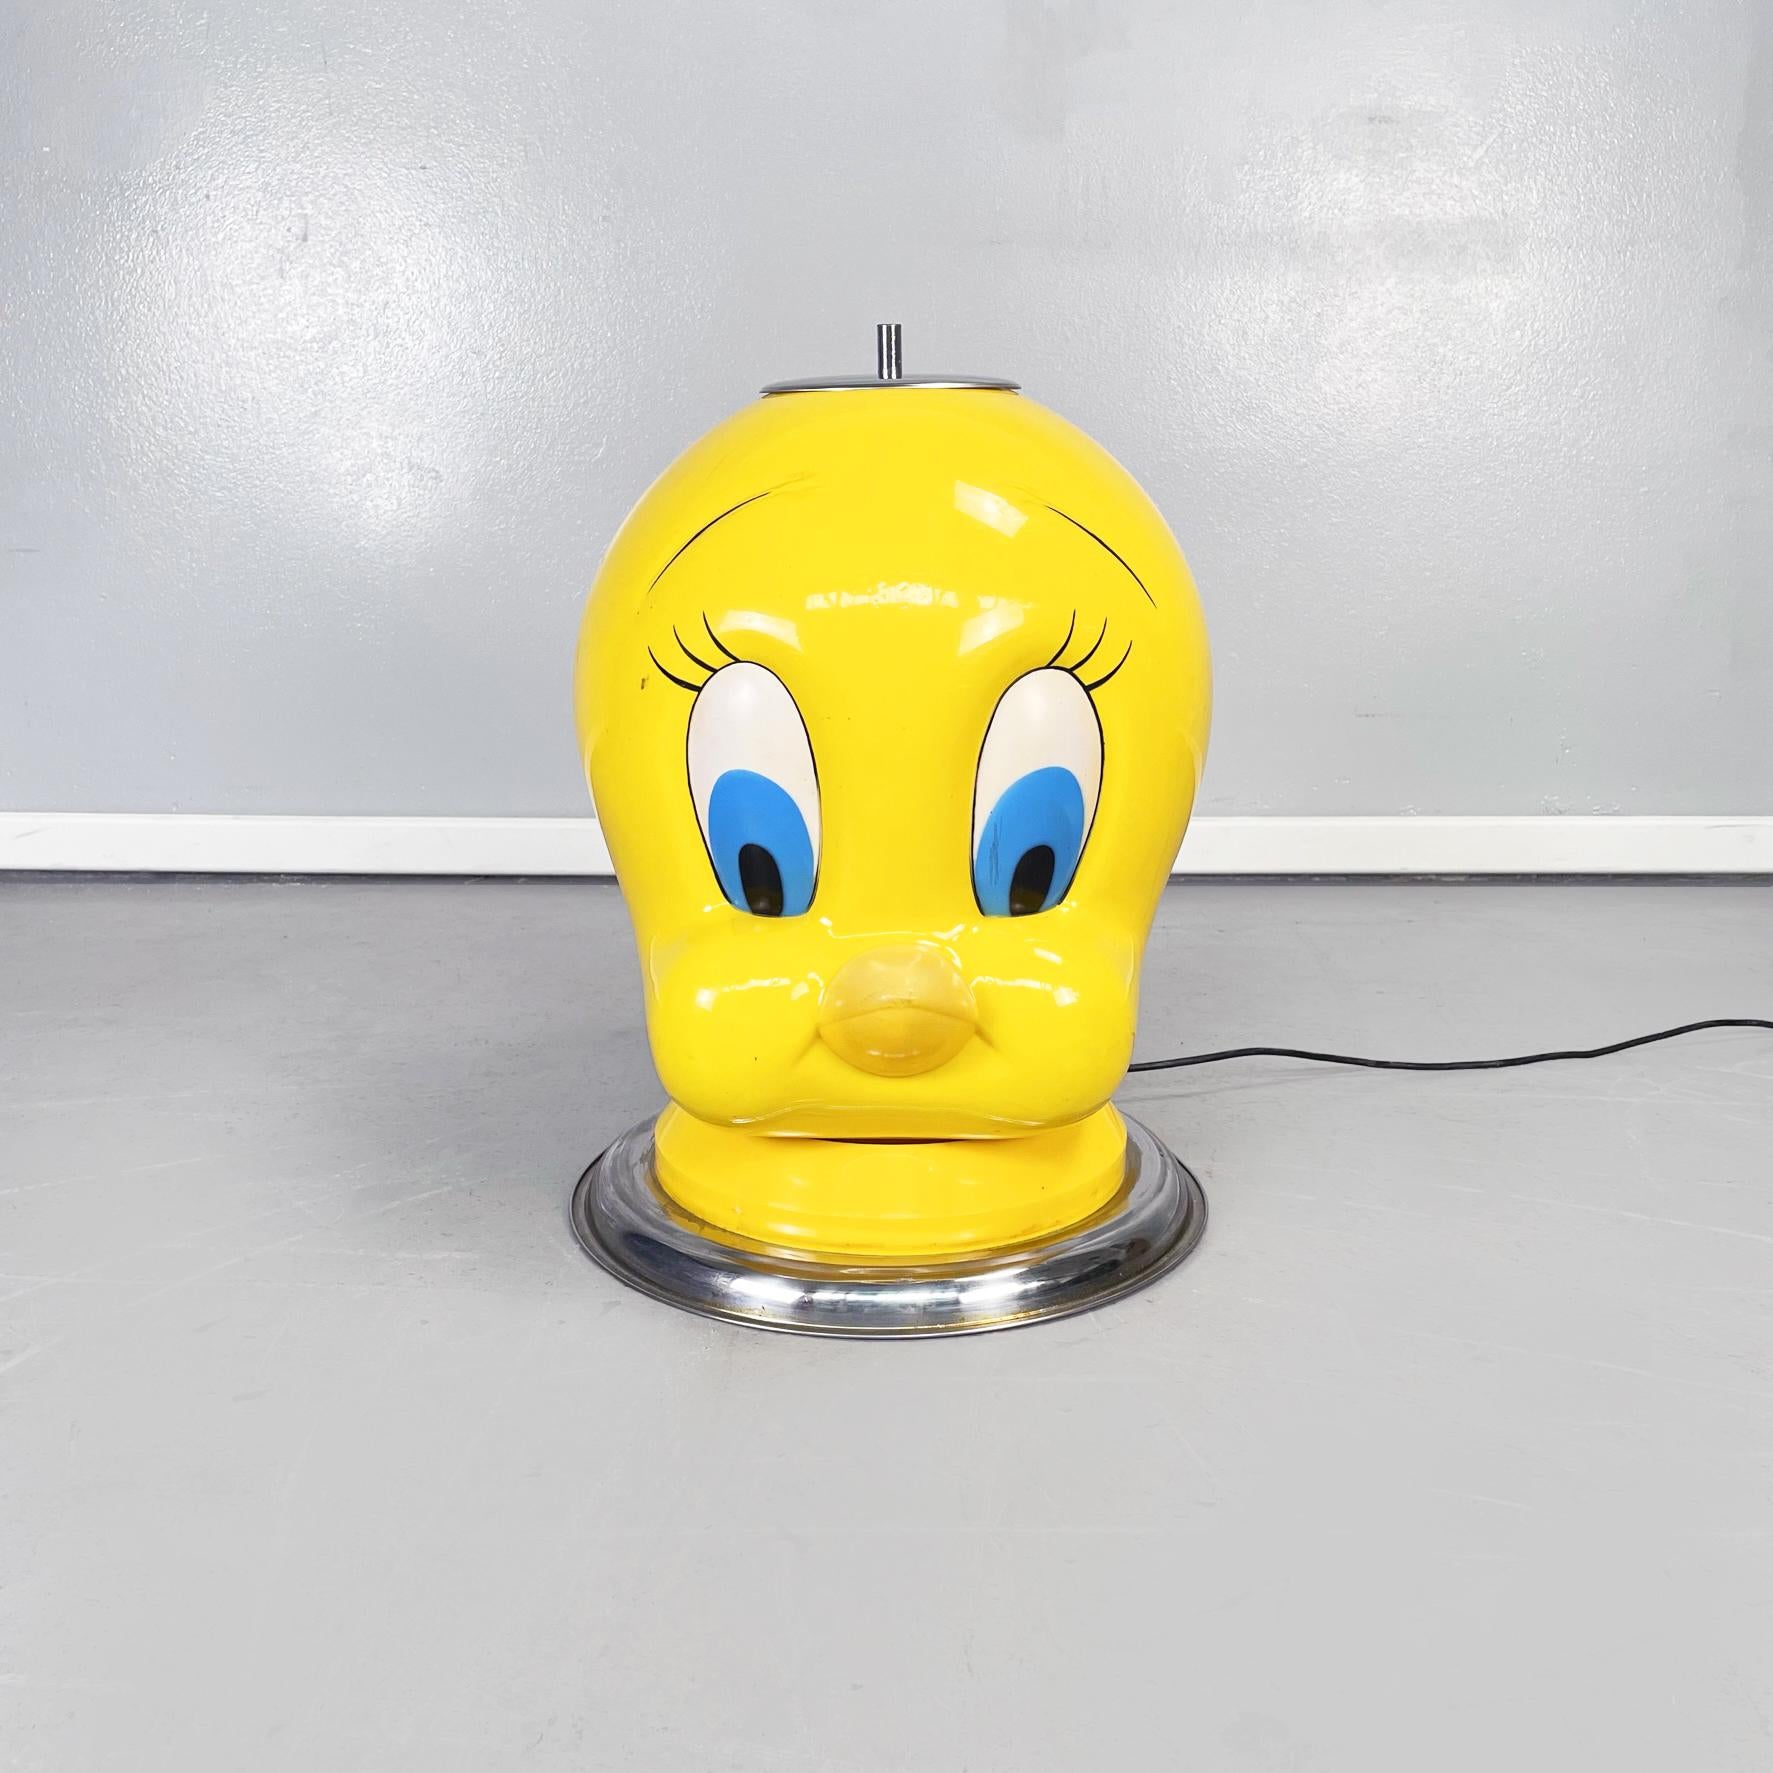 Italian modern plastic floor lamp of the head of Tweety Bird, 1990s.
Floor lamp in the shape of the head of the famous character Tweety Bird from Warner Bros, in plastic. Big light blue eyes with long lashes, typical of this character. The round